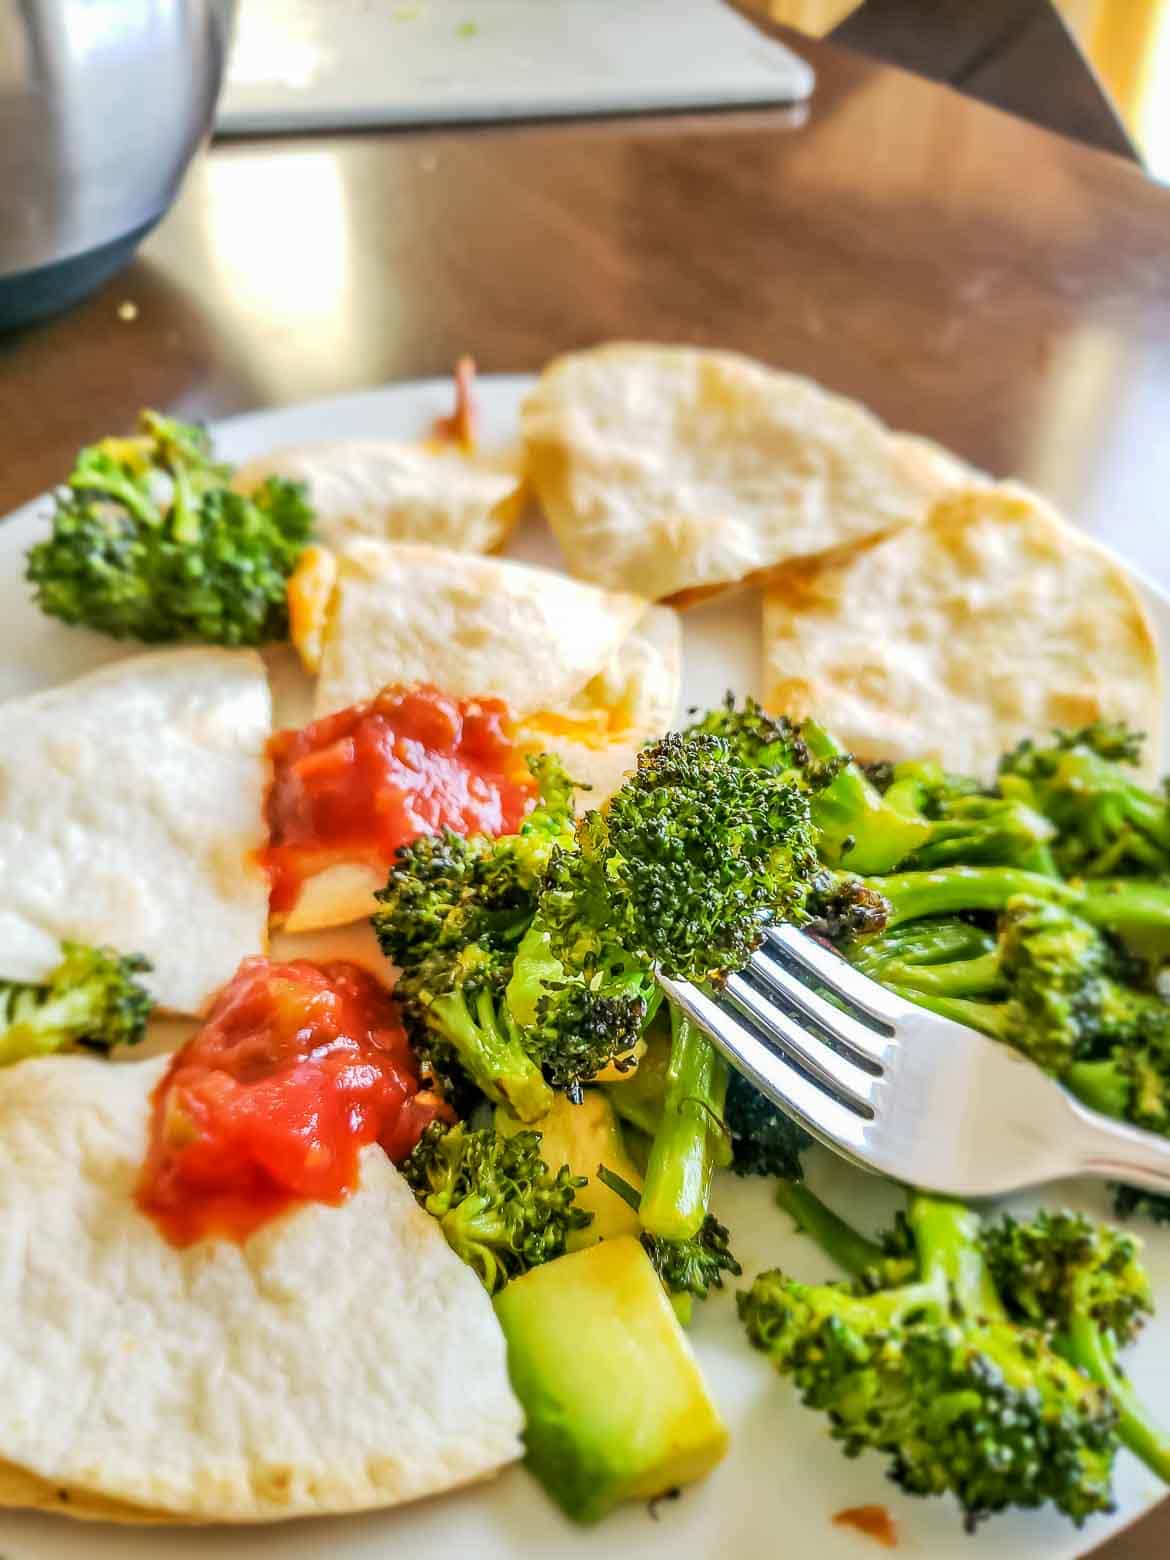 Chefs Plate review with vegetarian Cheese Quesadilla and Broccoli Avocado Salad 